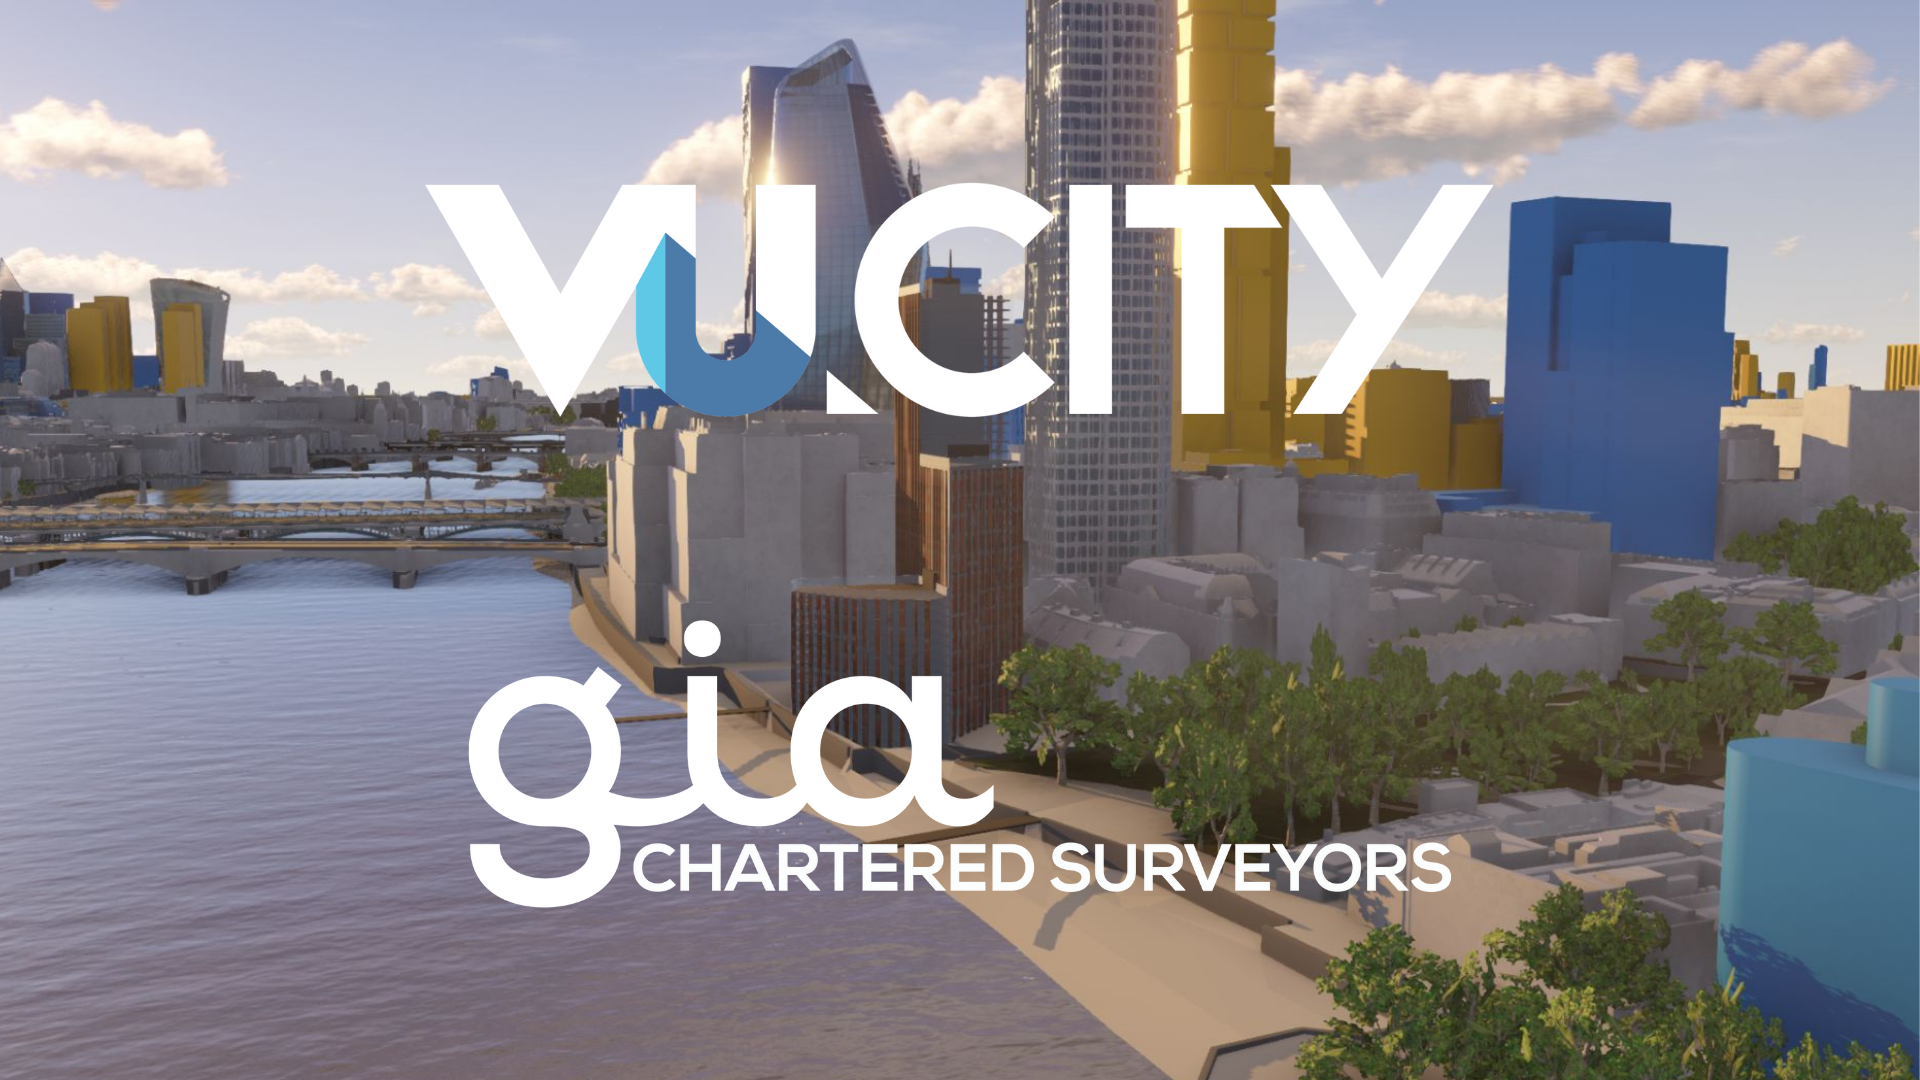 VU.CITY London Webinar with Rights of Light Specialists Guest GIA Surveyors